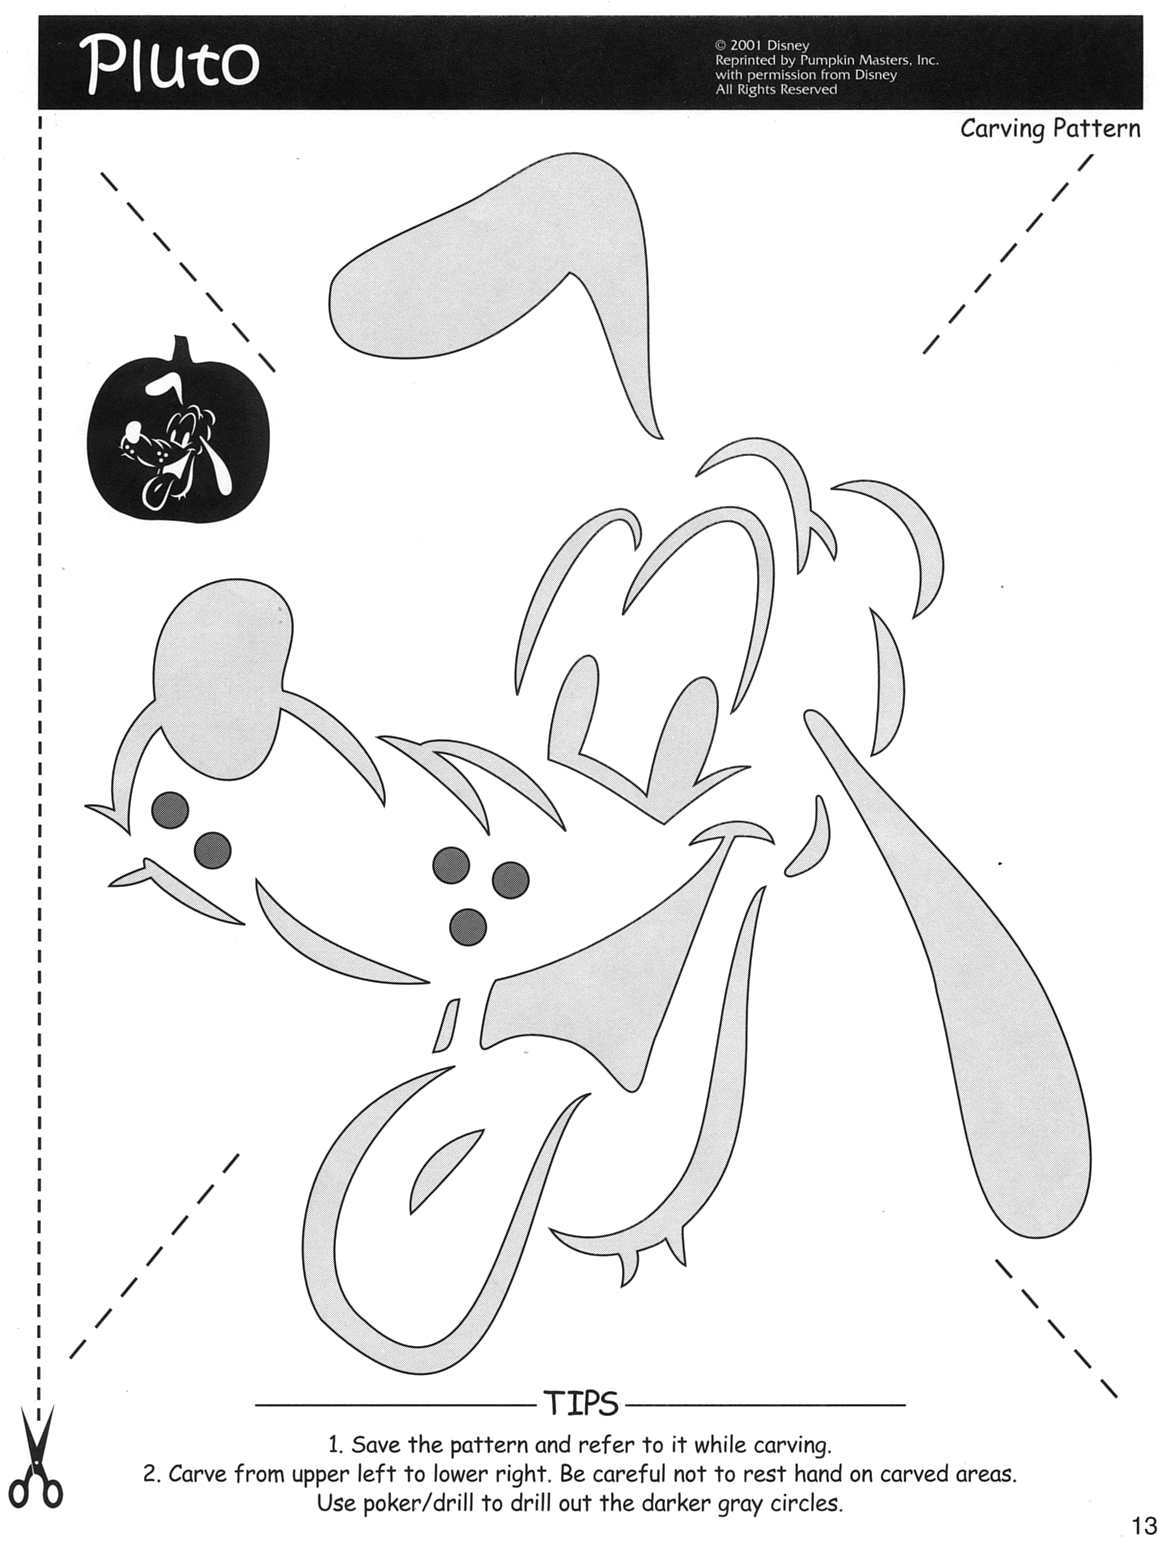 Free Printable Mickey Minnie Mouse Pumpkin carving stencils patterns ...